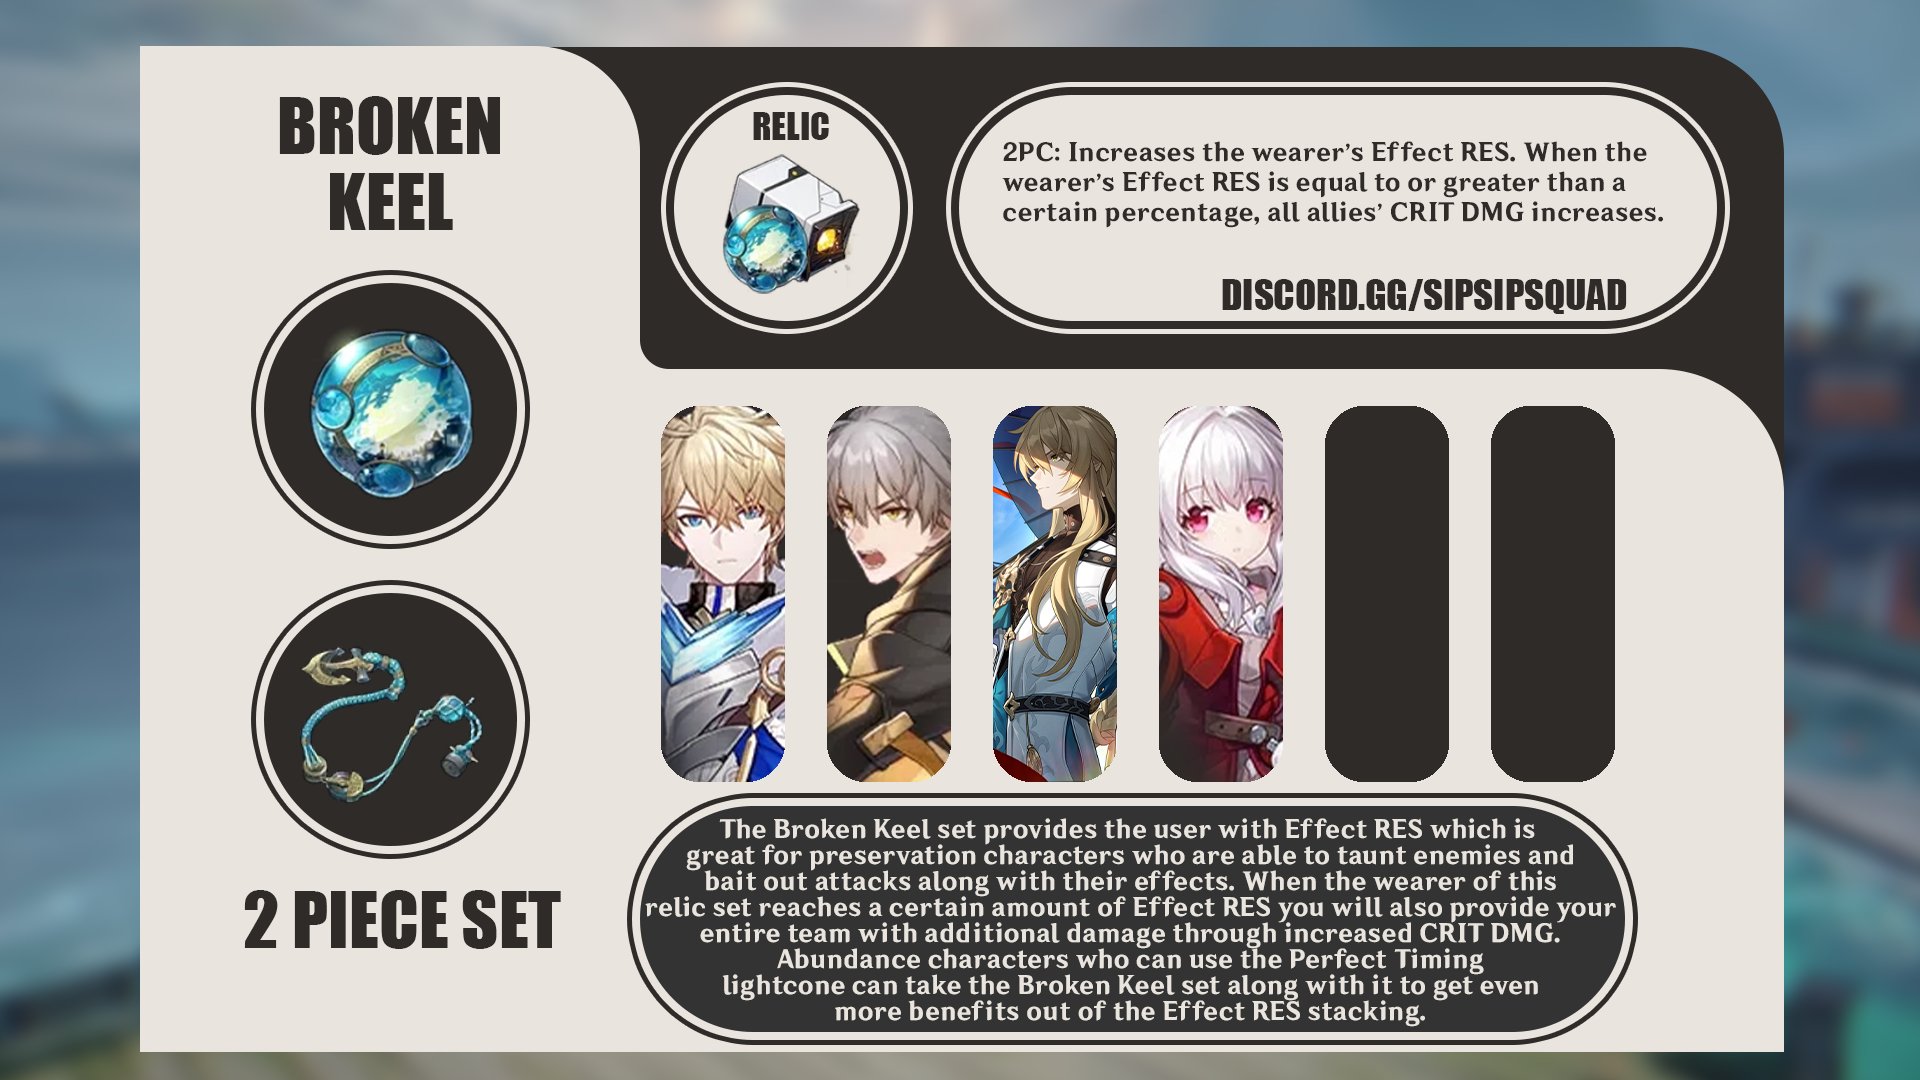 Honkai: Star Rail Version 1.2 Update Notes and New Content